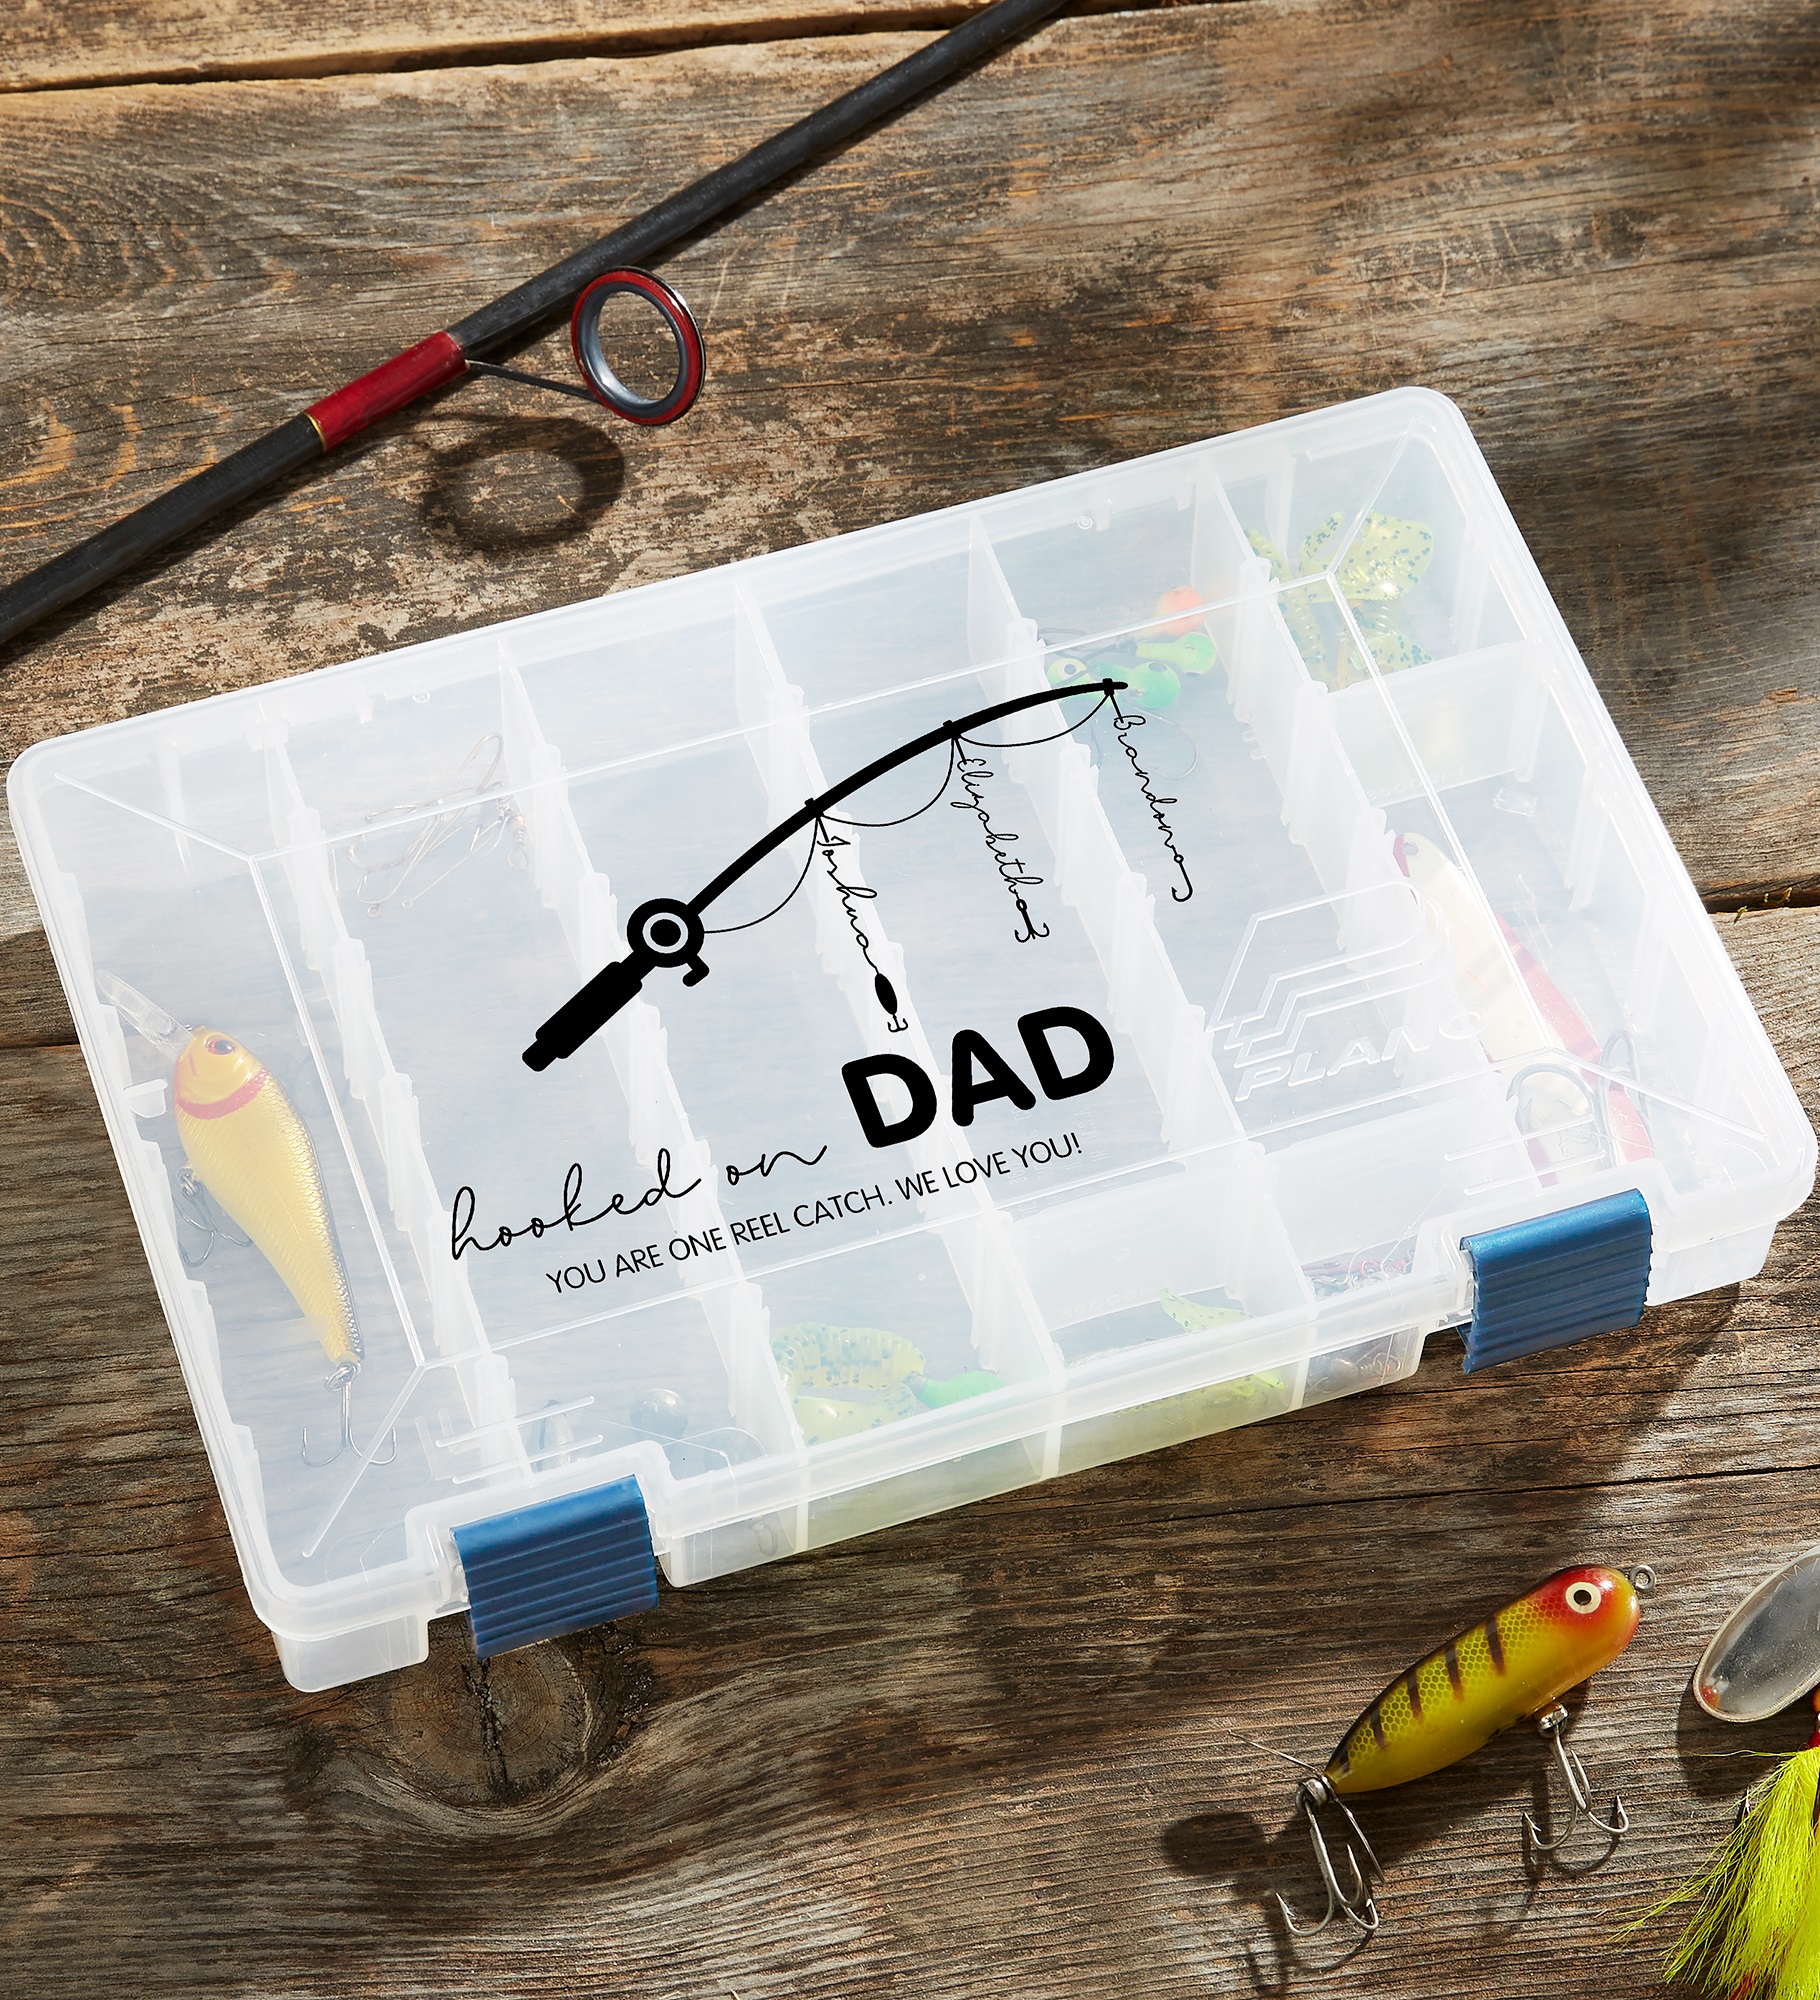 Hooked On Dad Personalized Plano Tackle Fishing Box